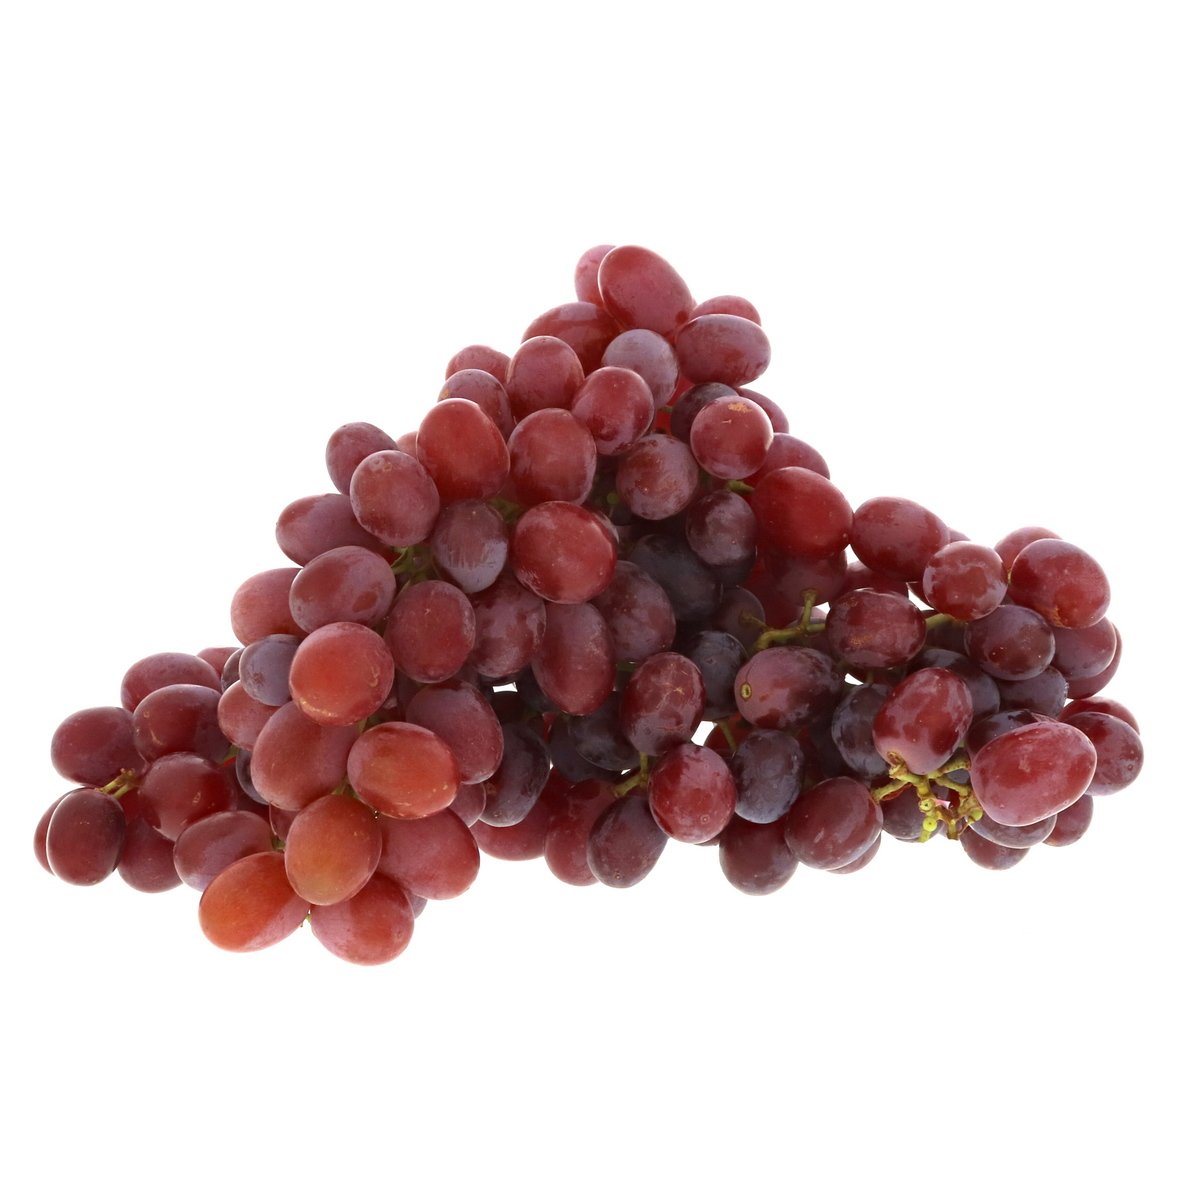 Grapes Red 500 g